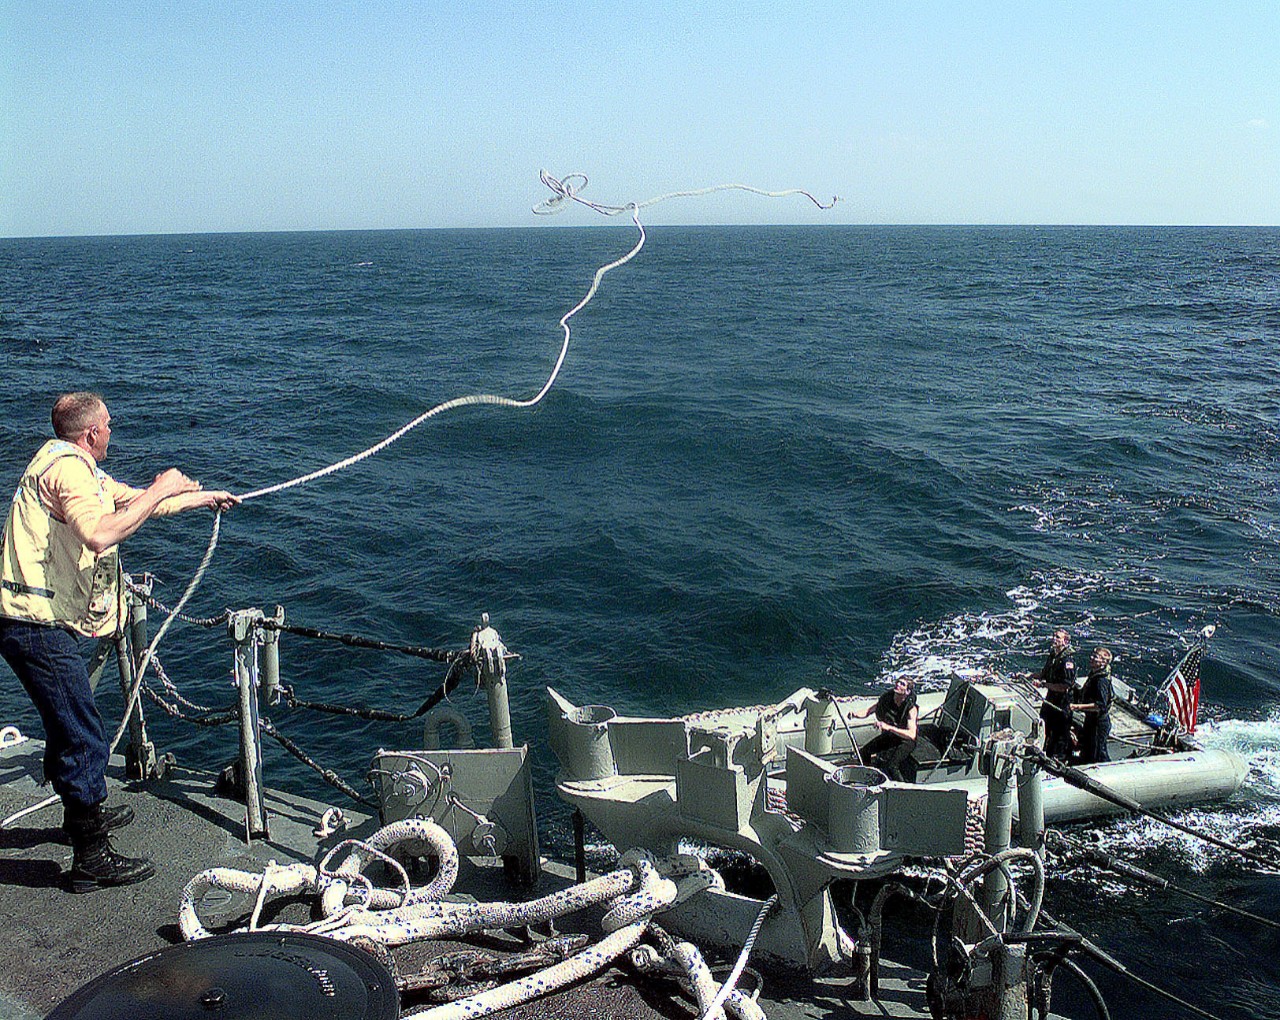 980304-N-2568S-019:   USS Samuel B. Roberts (FFG-58), 1998.   Boatswain's Mate 2nd Class Thomas Eckert throws a line out from the fantail of USS  Samuel B. Roberts (FFG-58) to his shipmates in a Rigid Hull Inflatable Boat (RHIB).  The RHIB pulled the line out to a disabled Iranian fishing boat (not shown) that needs to be towed to shore.  Roberts is patrolling the  Arabian Sea in support of the Southwest Asia (SWA) build-up, March 4, 1998.  U.S. Navy Photograph, now in the collections of the U.S. National Archives.   